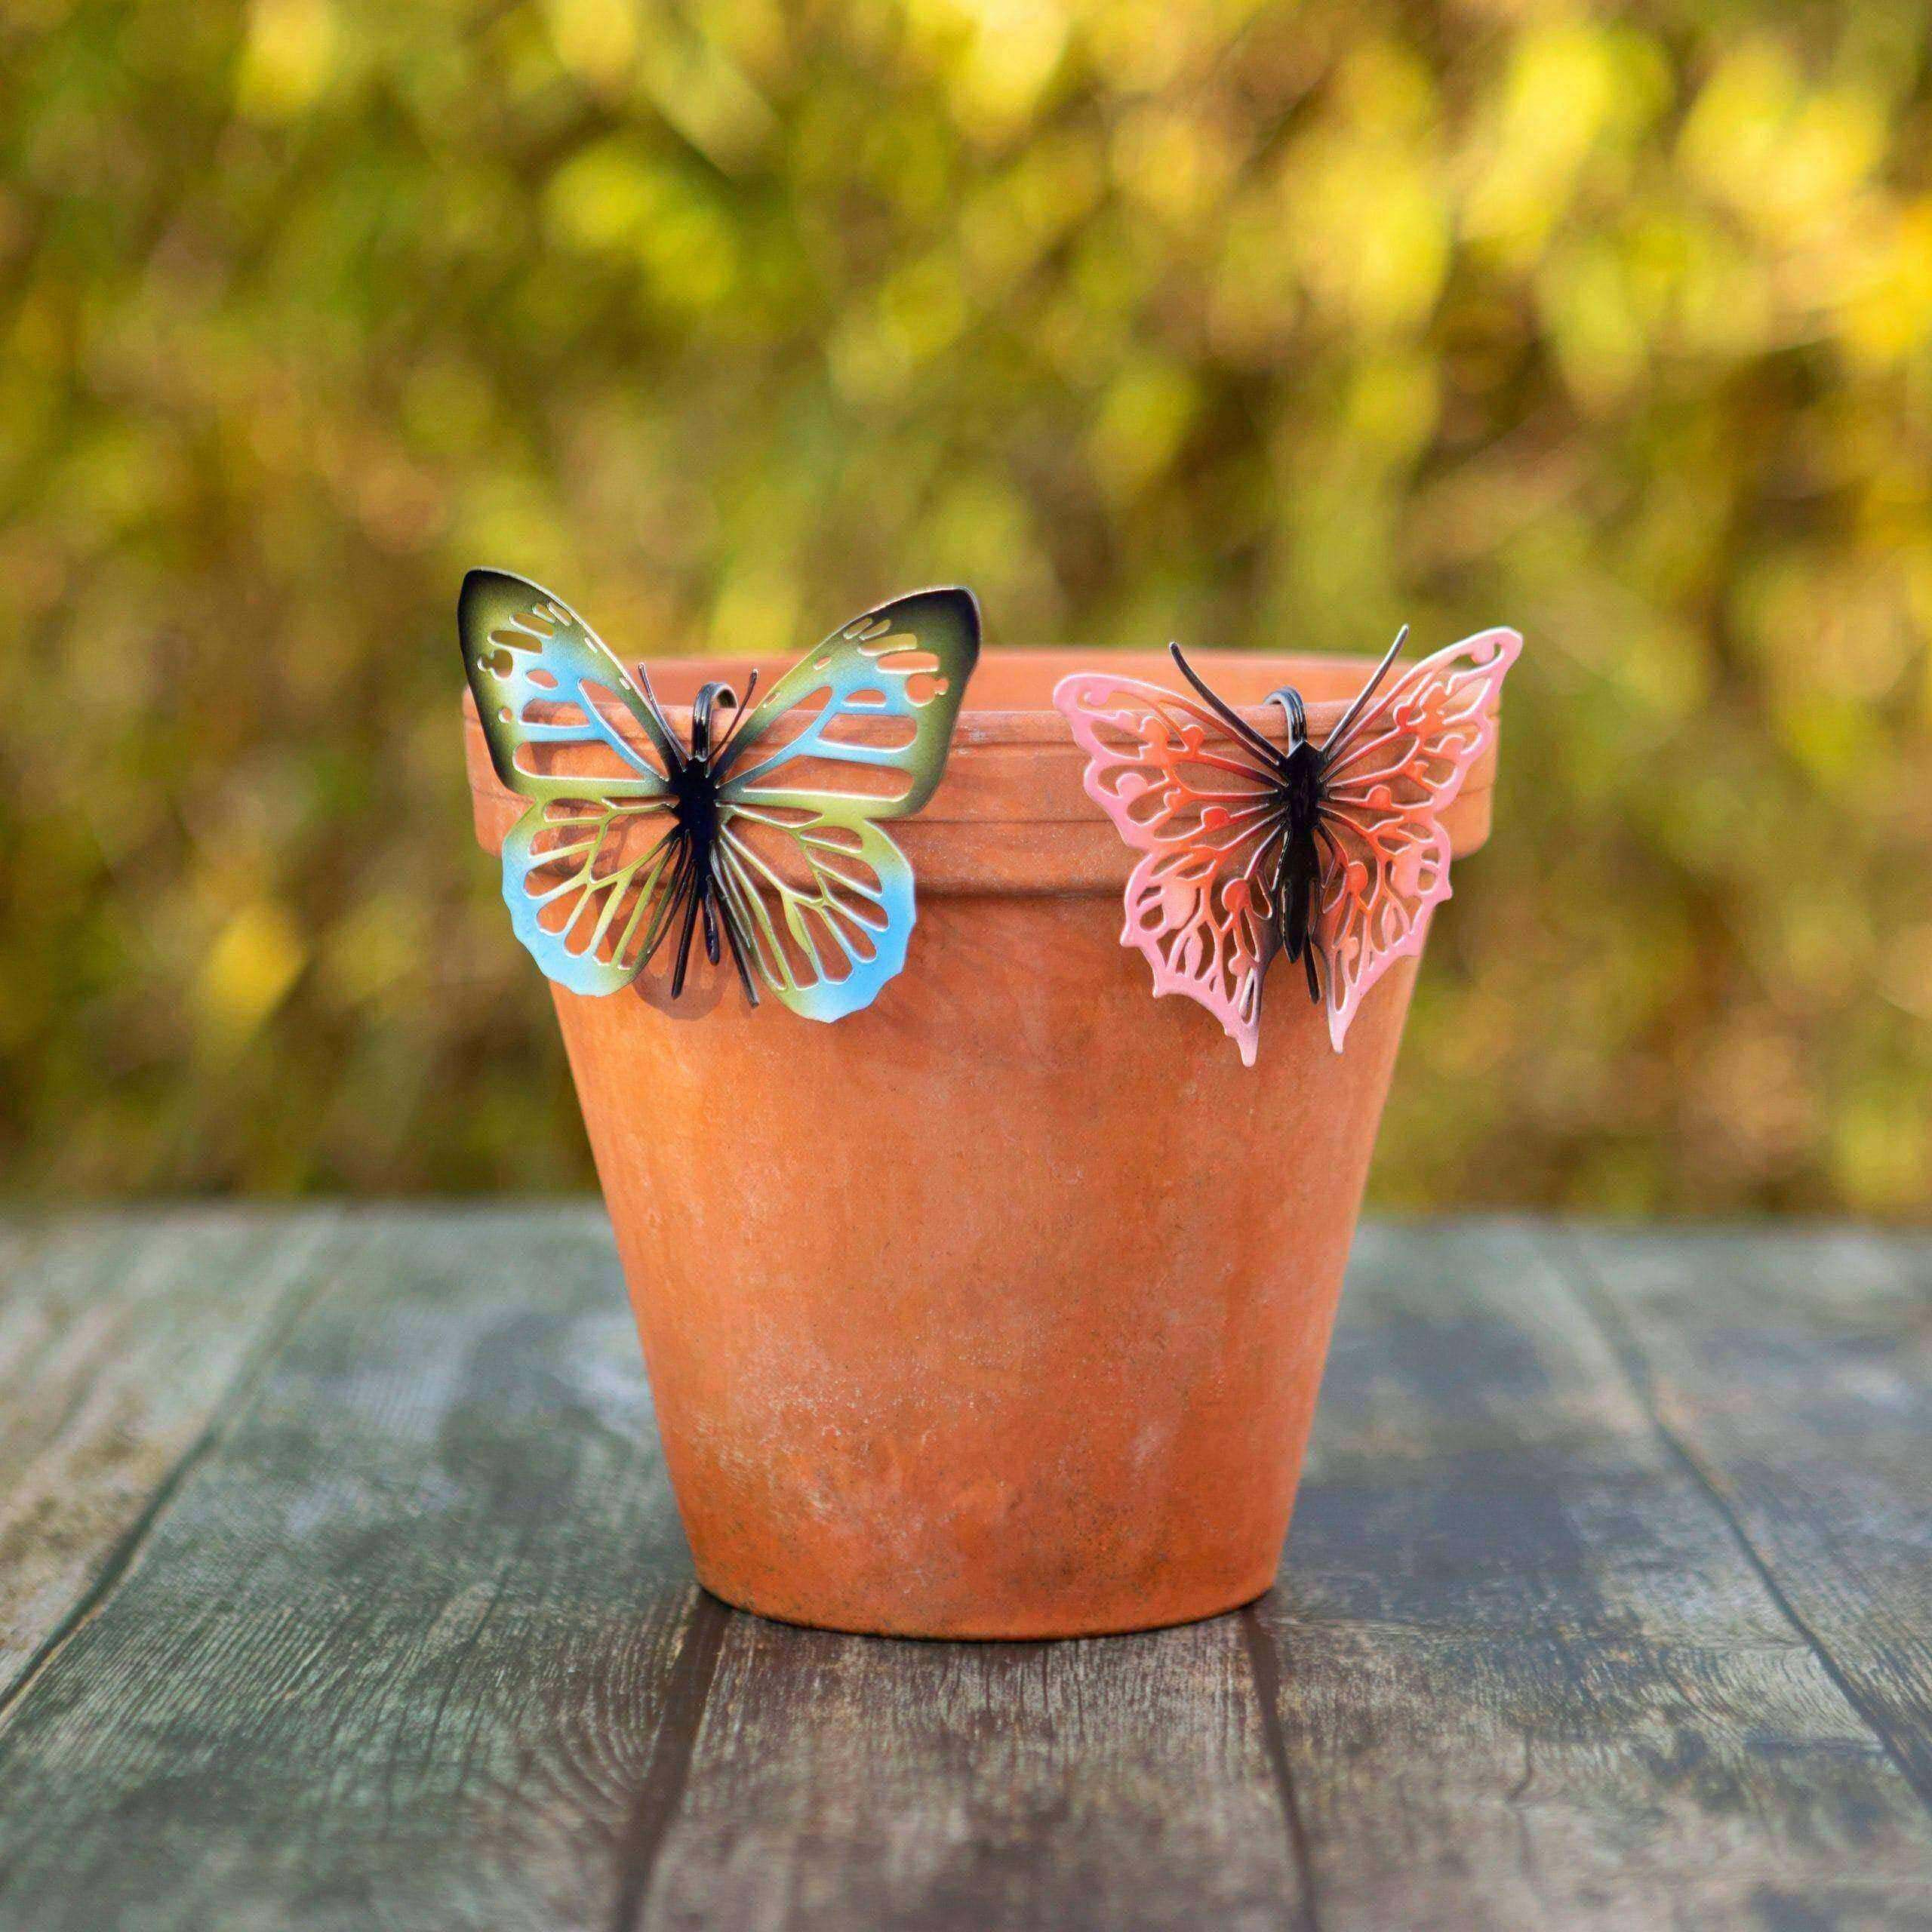 Set of Four Colourful Metal Butterfly Silhouette Hangers - The Farthing